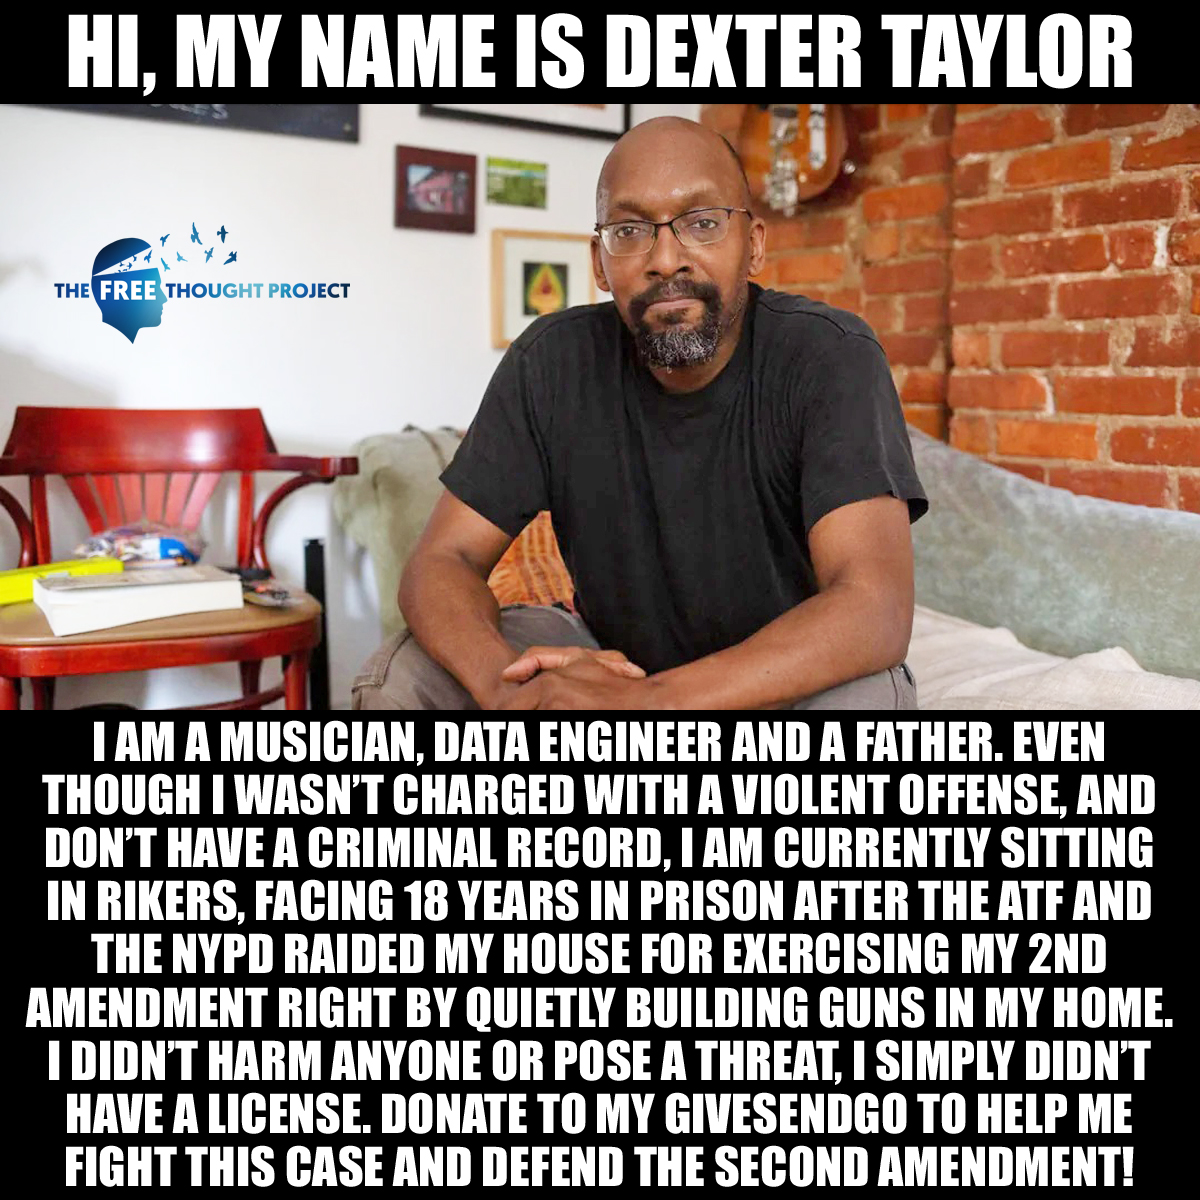 @therealBusyBody @jeffcharlesjr @DoniTheDon_ If you're in touch with Dexter's Mom & Dad, please thank them for me for raising such a fine son. Parenting a kid as intelligent as Dexter is not very easy, but I think this community is evidence they both did a truly awesome job with Dexter. #IStandWithDexterTaylor